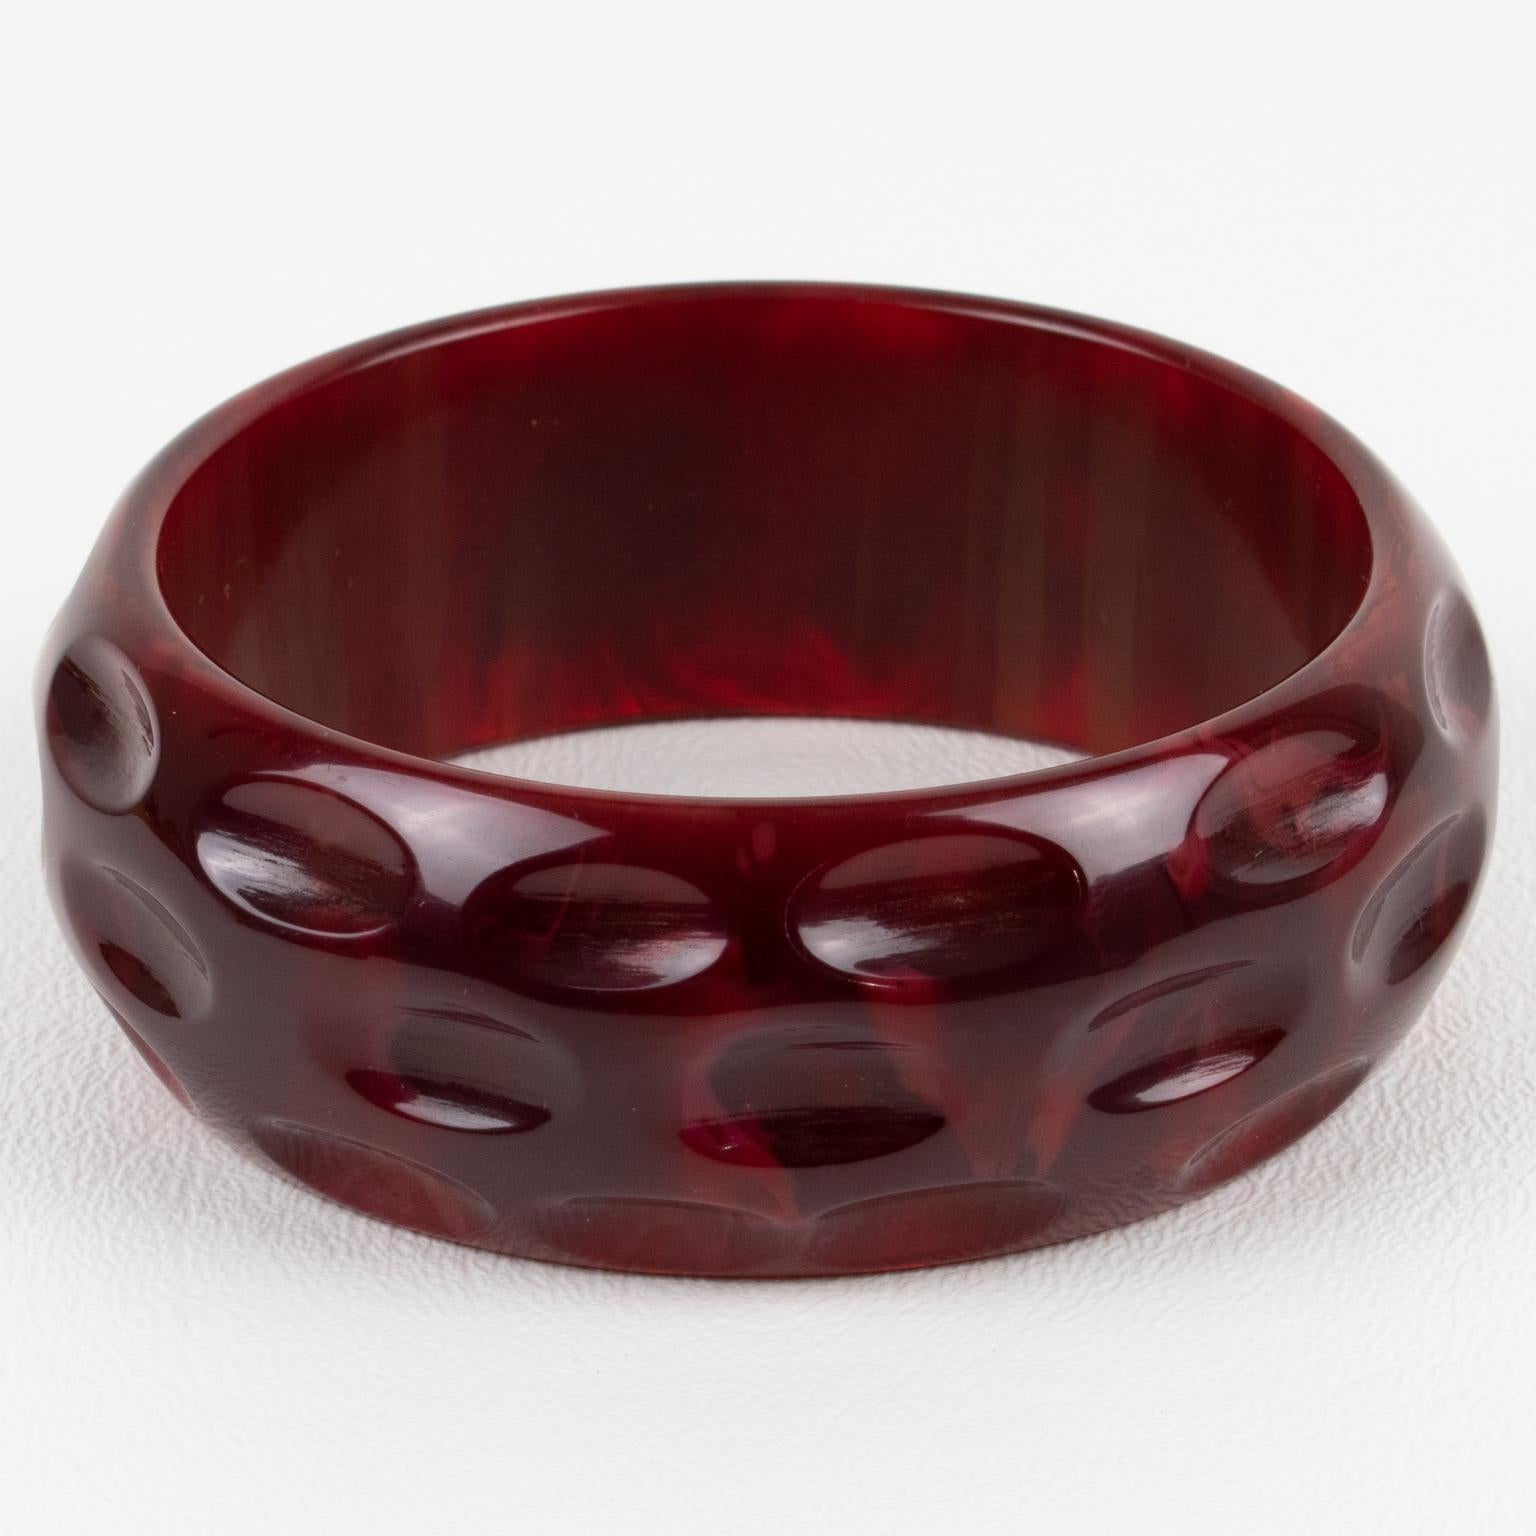 This is a stunning crimson-red marble Bakelite bracelet bangle. It features a chunky domed shape with geometric and deeply carved designs. The color is an intense red marble tone with cloudy swirling. 
Measurements: Inside across is 2.50 in diameter